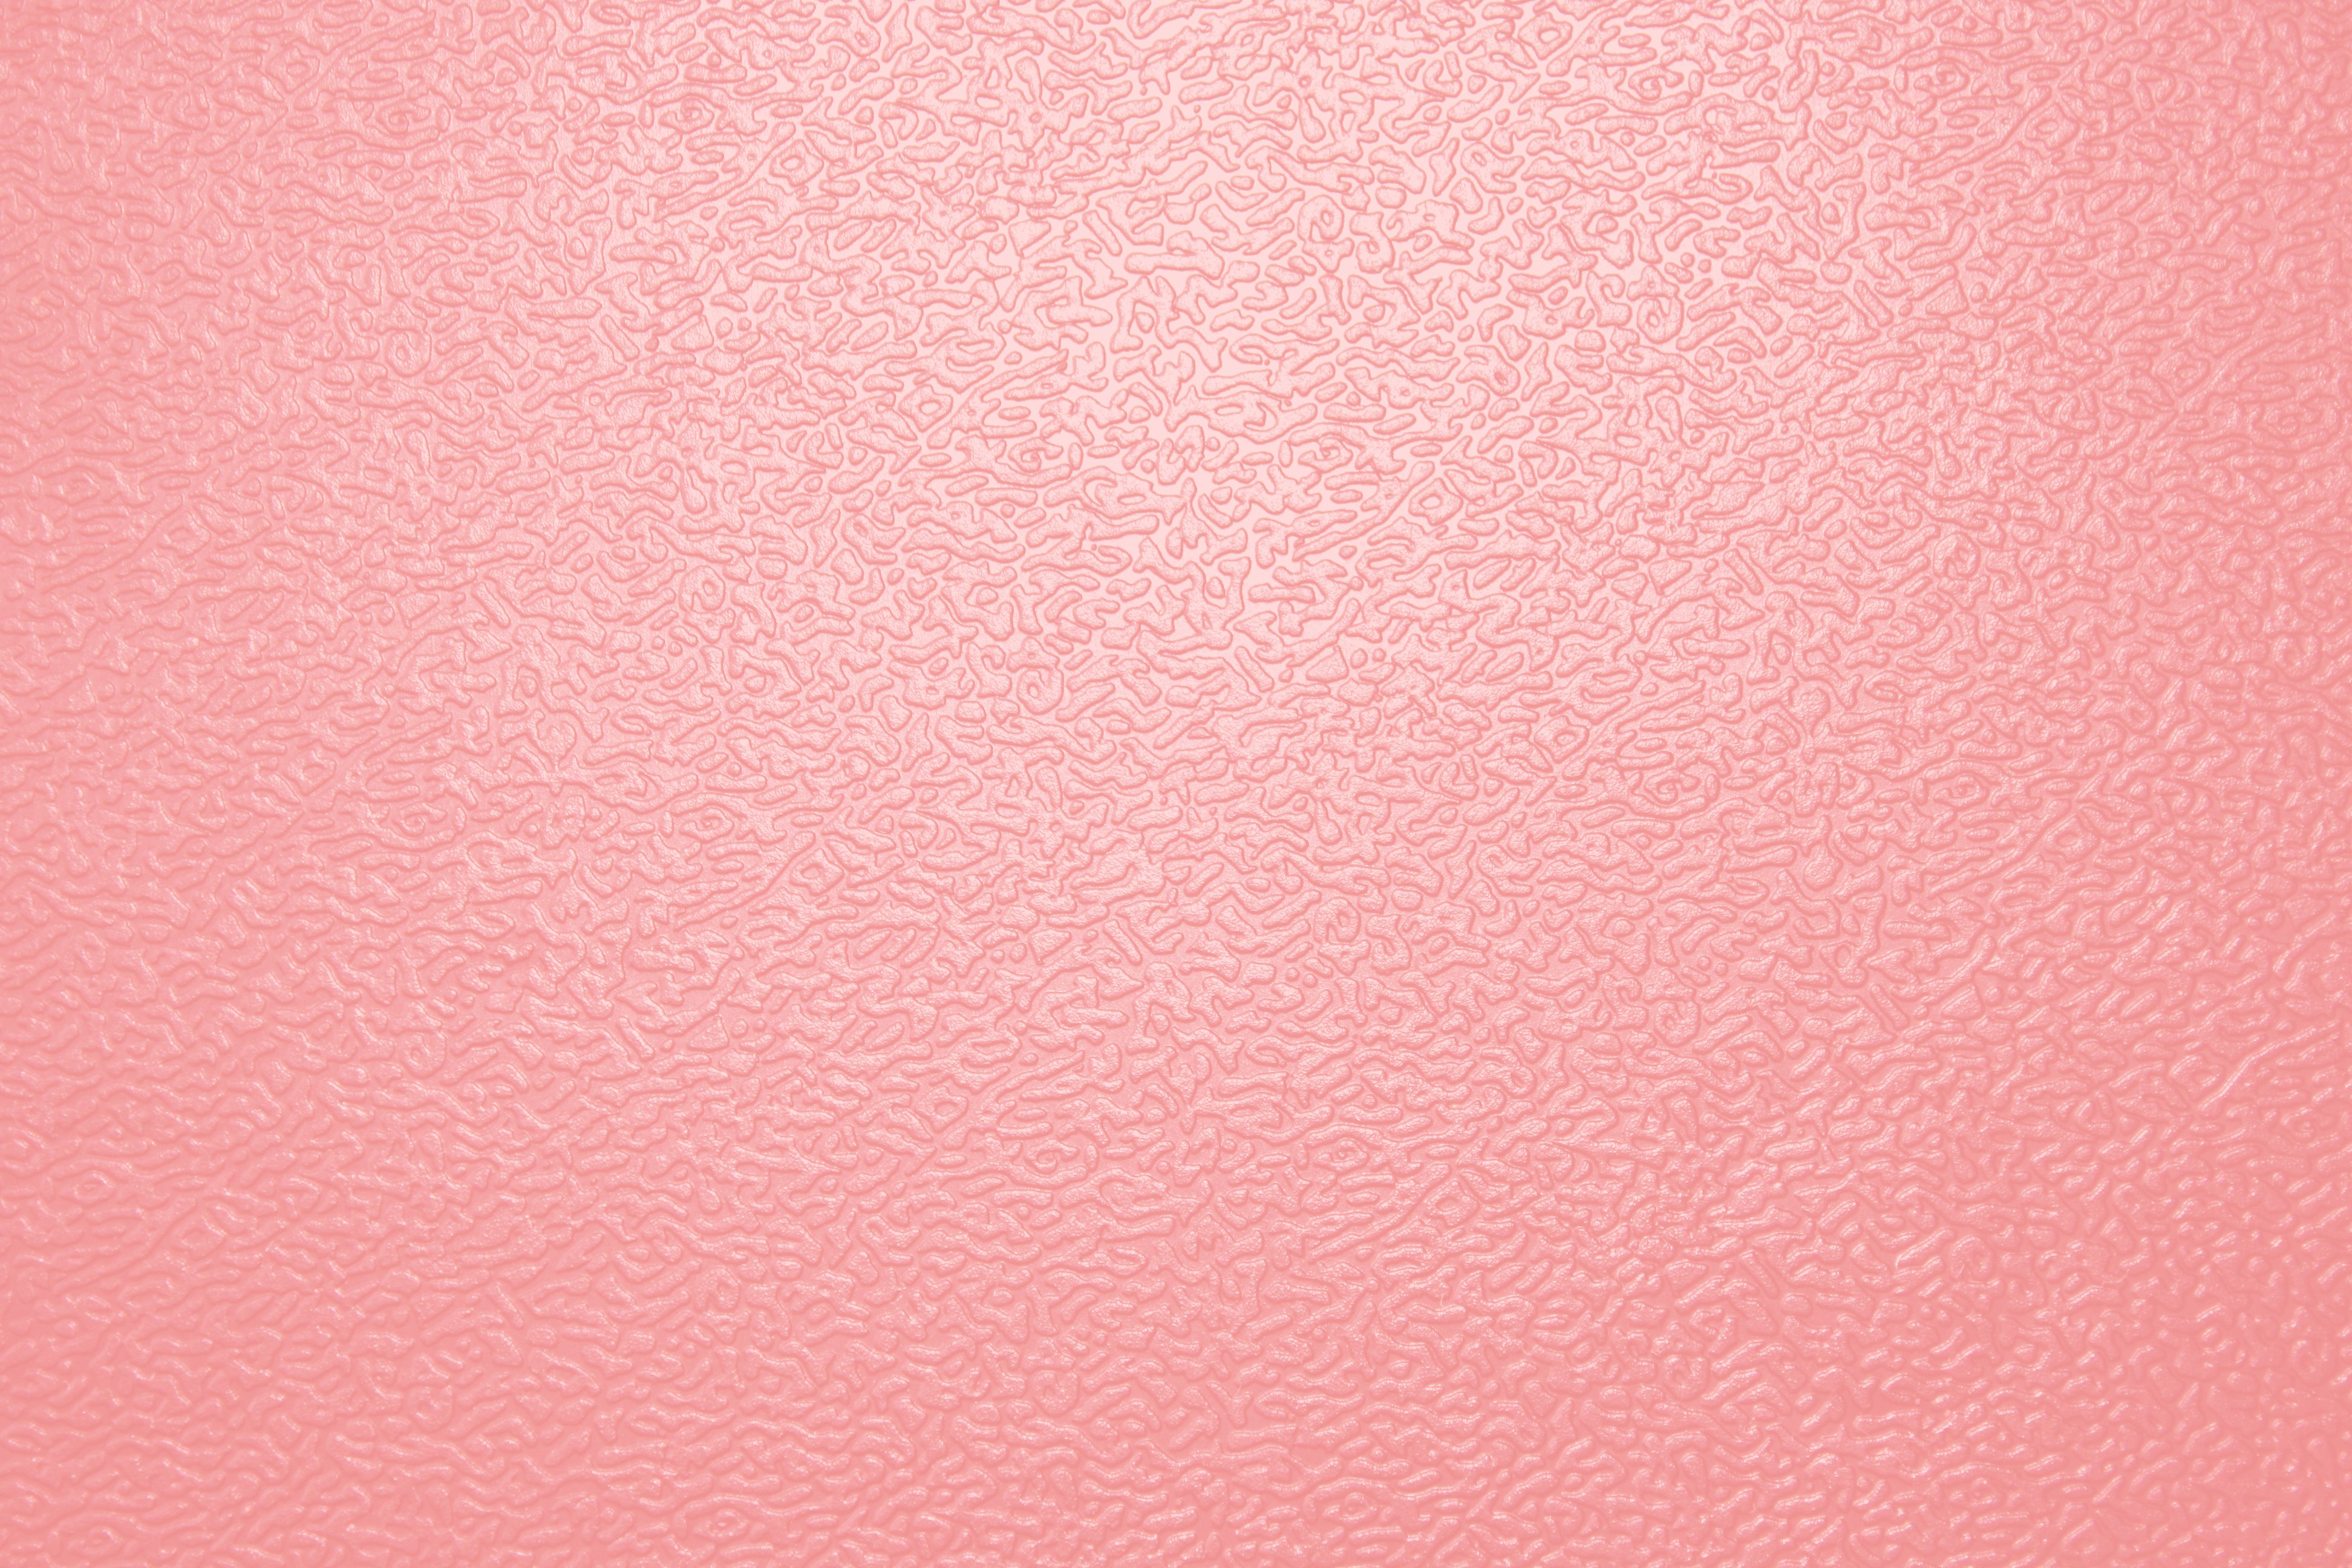 Textured Salmon Pink Colored Plastic Close Up High Resolution